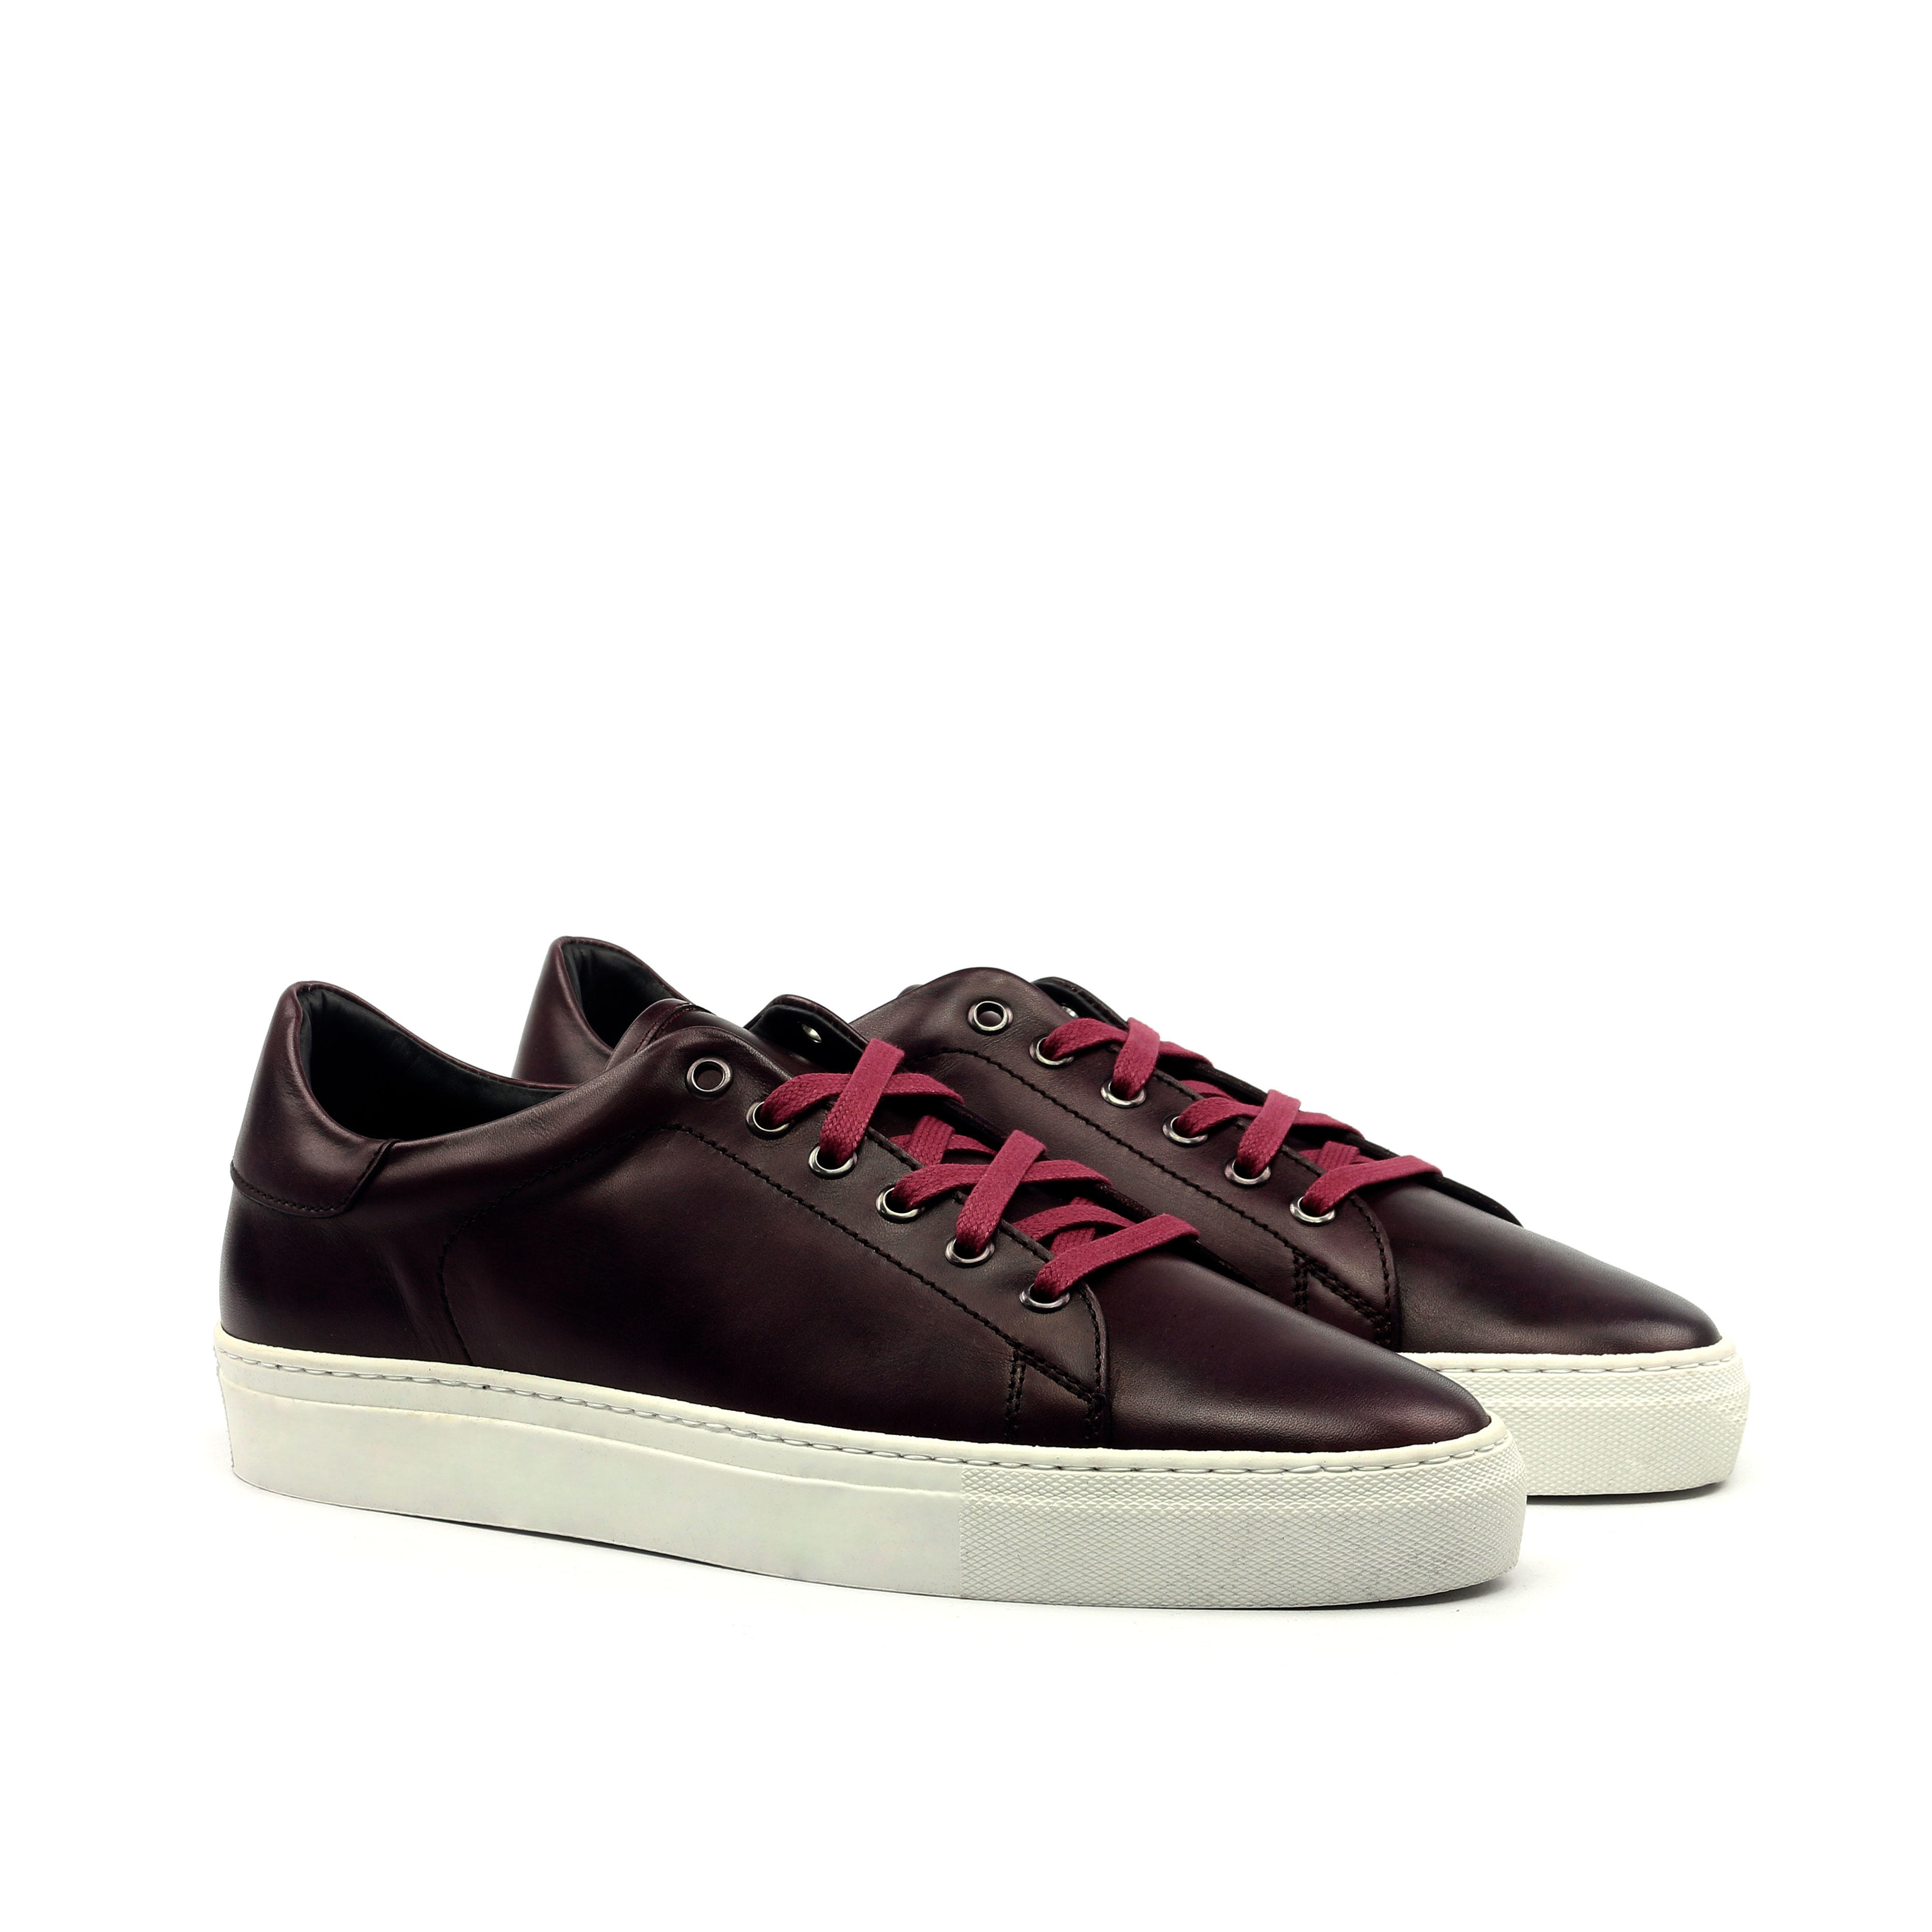 MANOR OF LONDON 'The Perry' Painted Oxblood Calfskin Tennis Trainer Luxury Custom Initials Monogrammed Front Side View